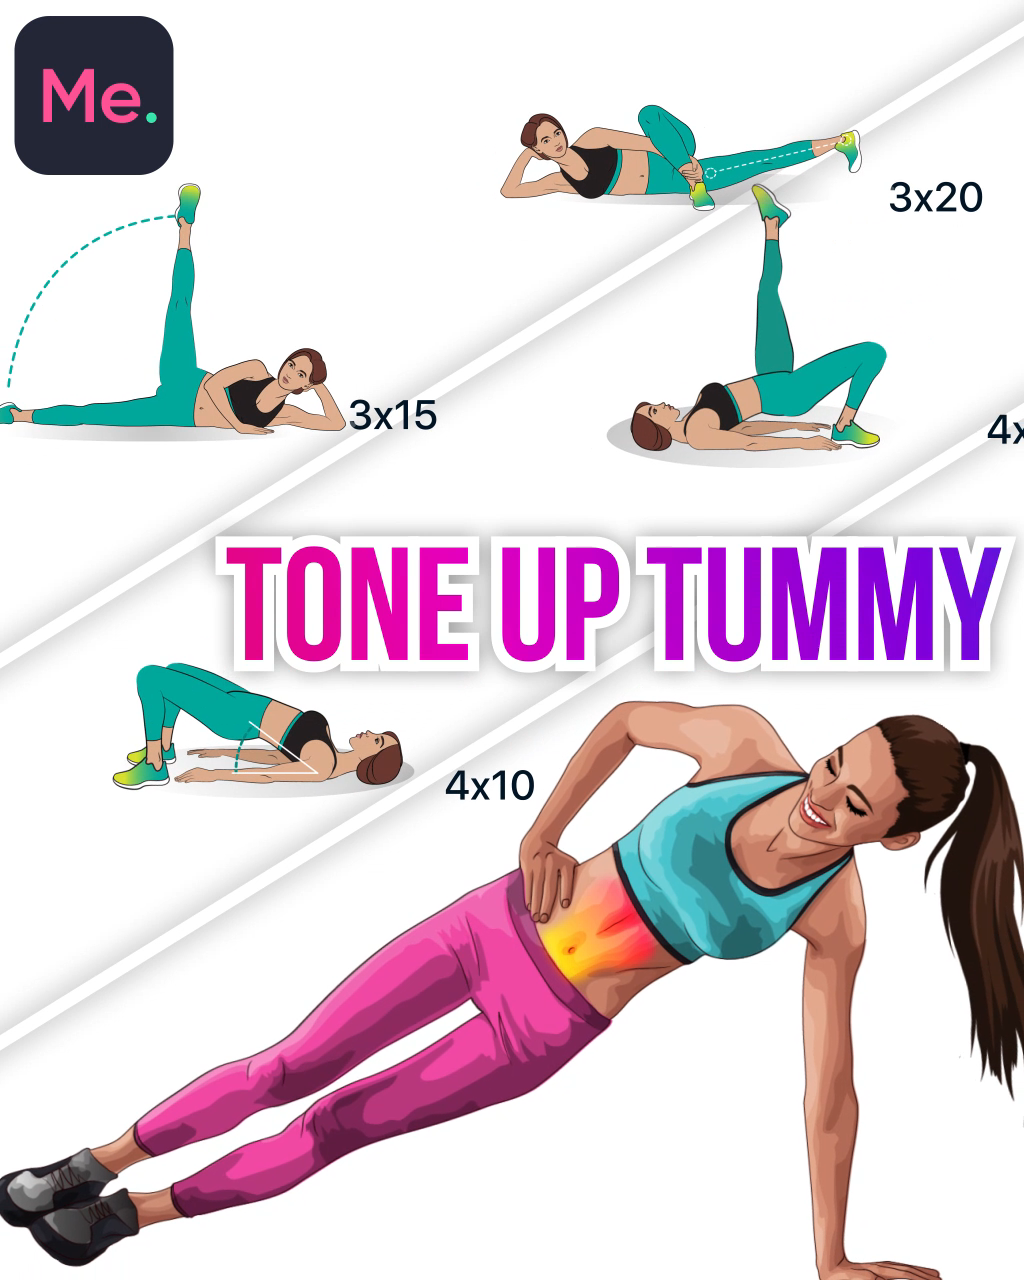 Tone Up Your Tummy with Workout -   16 fitness Quotes videos ideas